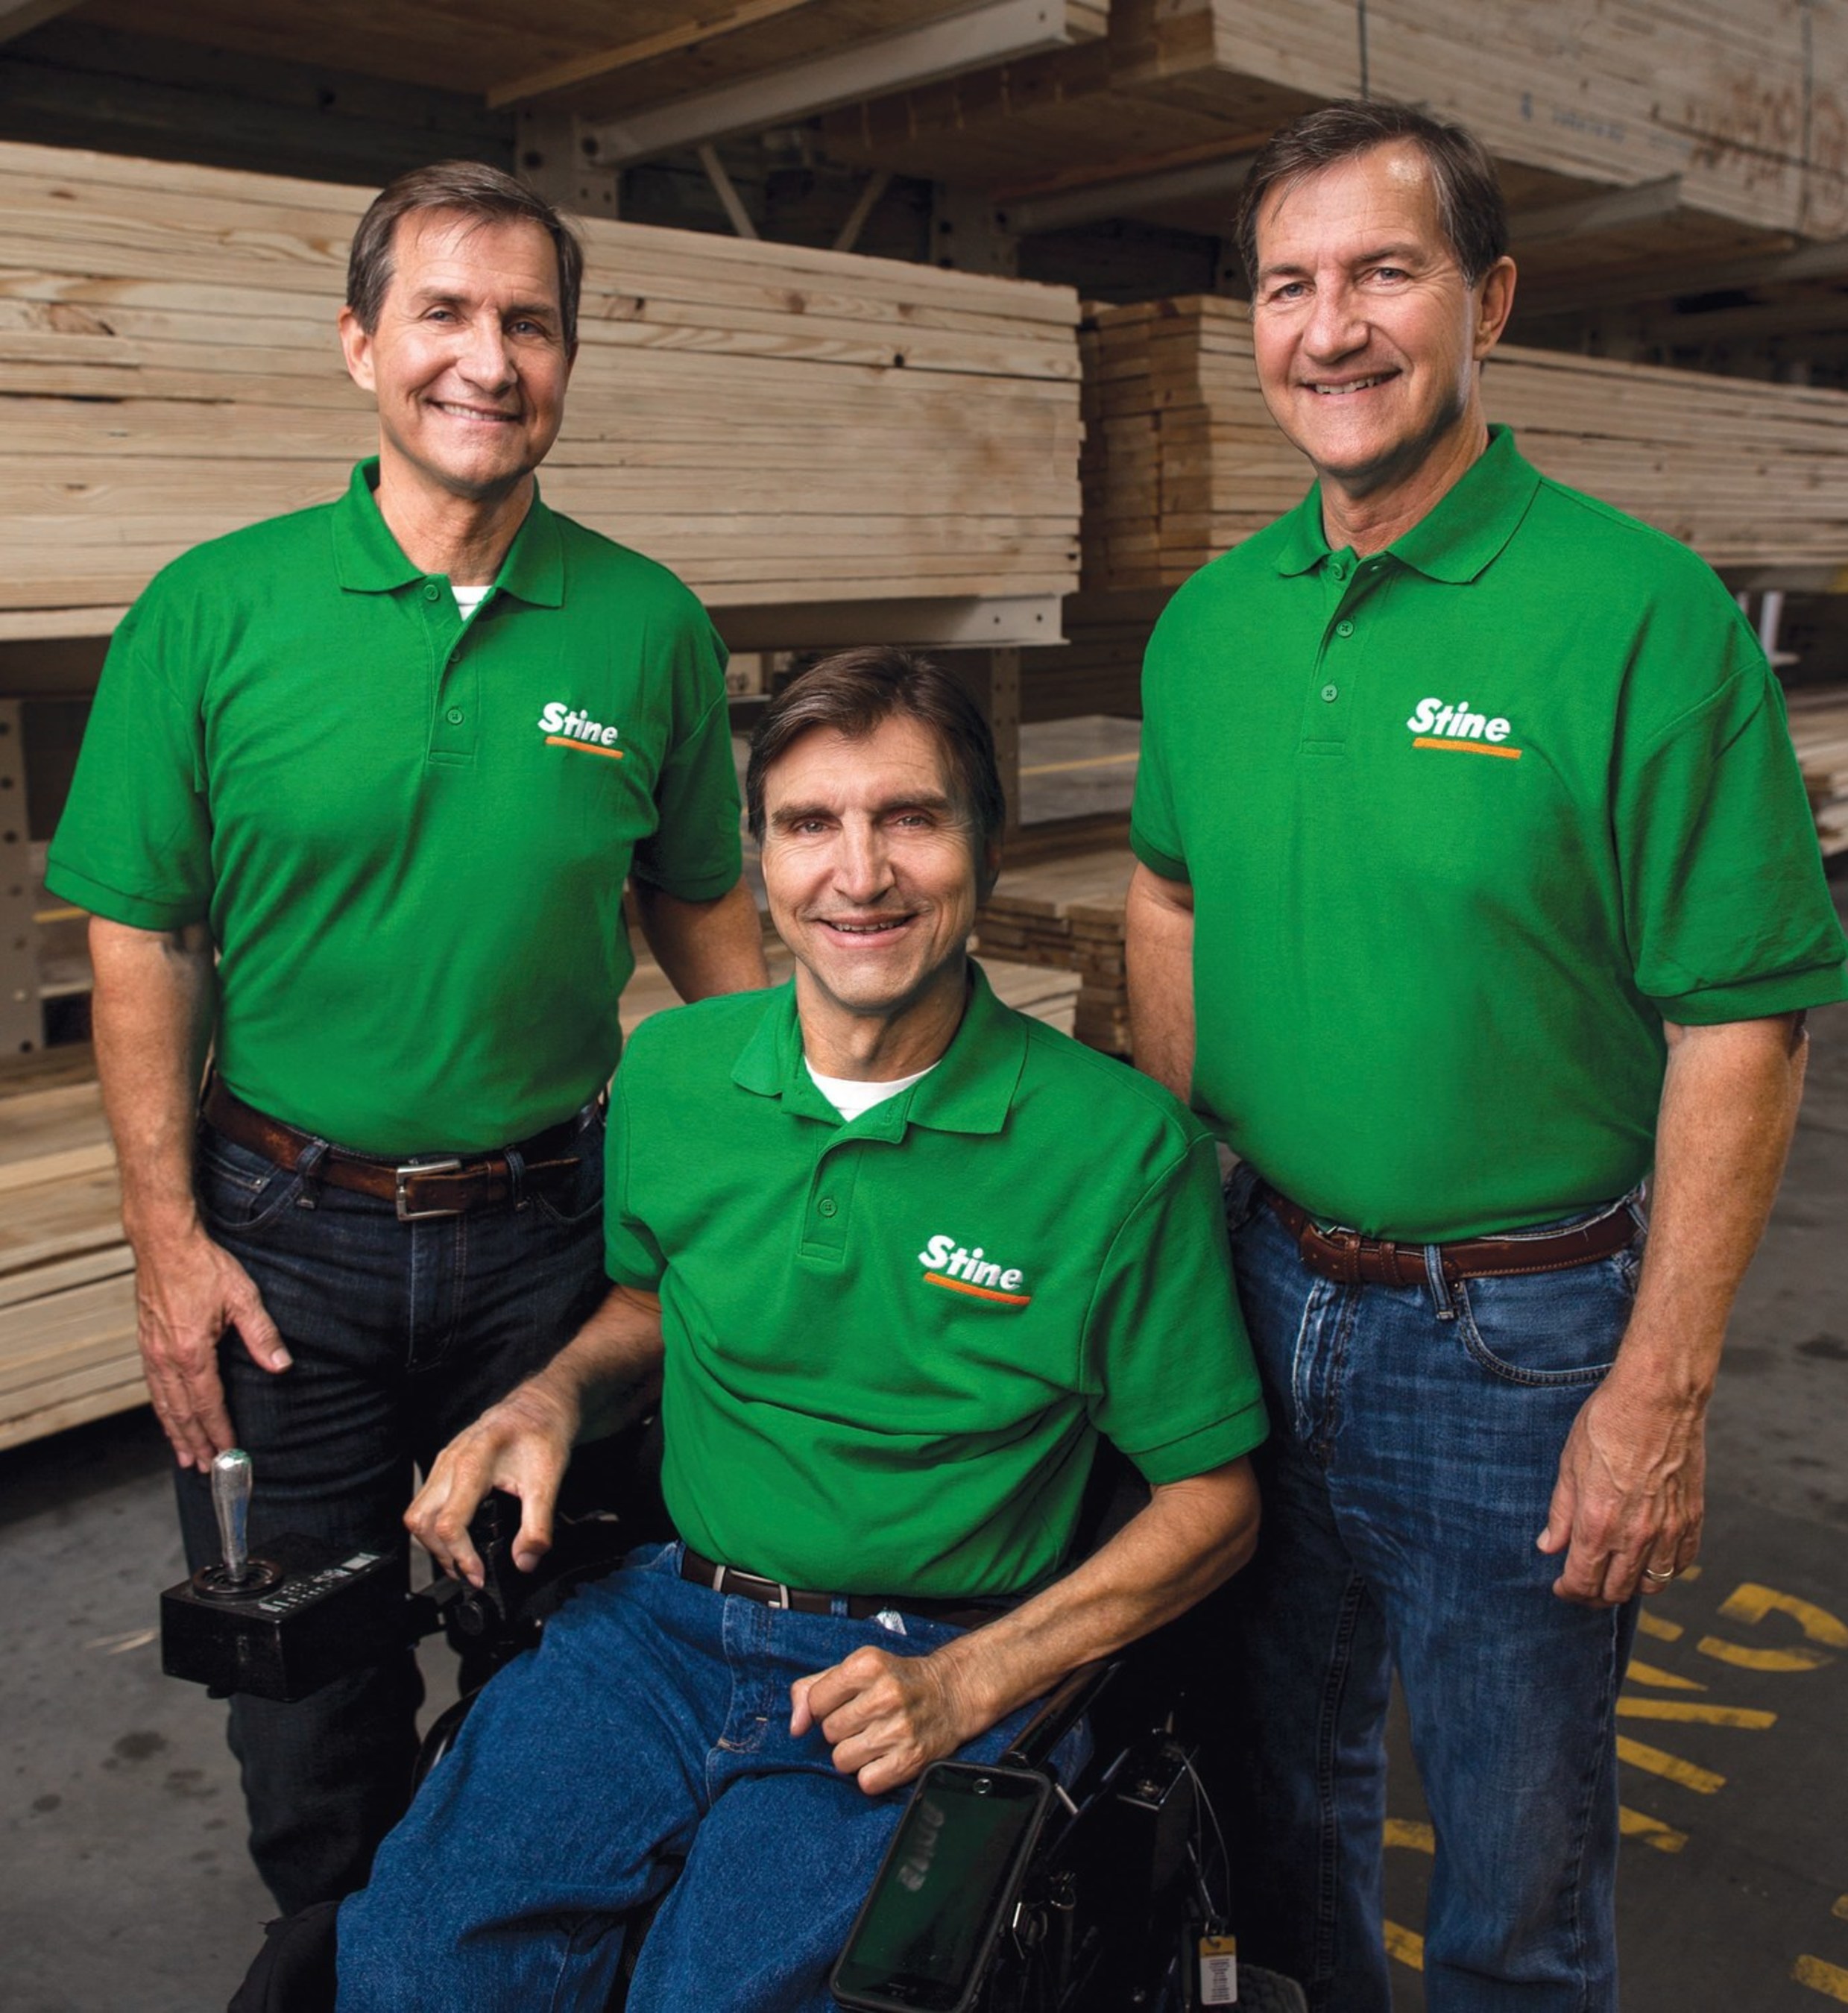 Three of the six brothers who own award-winning Stine Lumber in Sulphur, Louisiana. (Left to right pictured: Dennis Stine, Chief Executive Officer, Tim Stine, Chief Financial Officer, and David Stine, VP of Marketing and Merchandising)